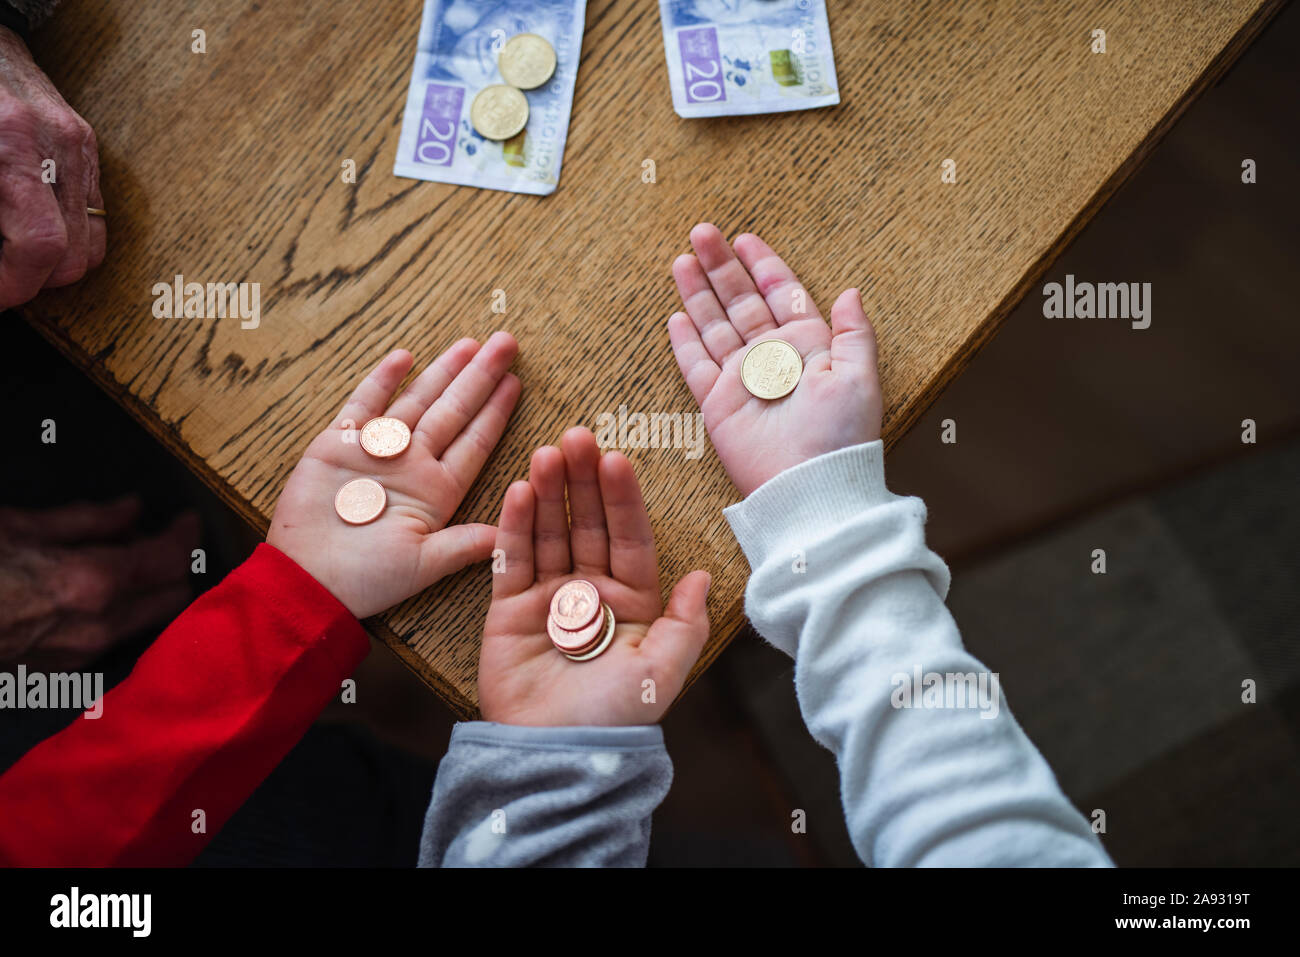 Hands holding coins Stock Photo